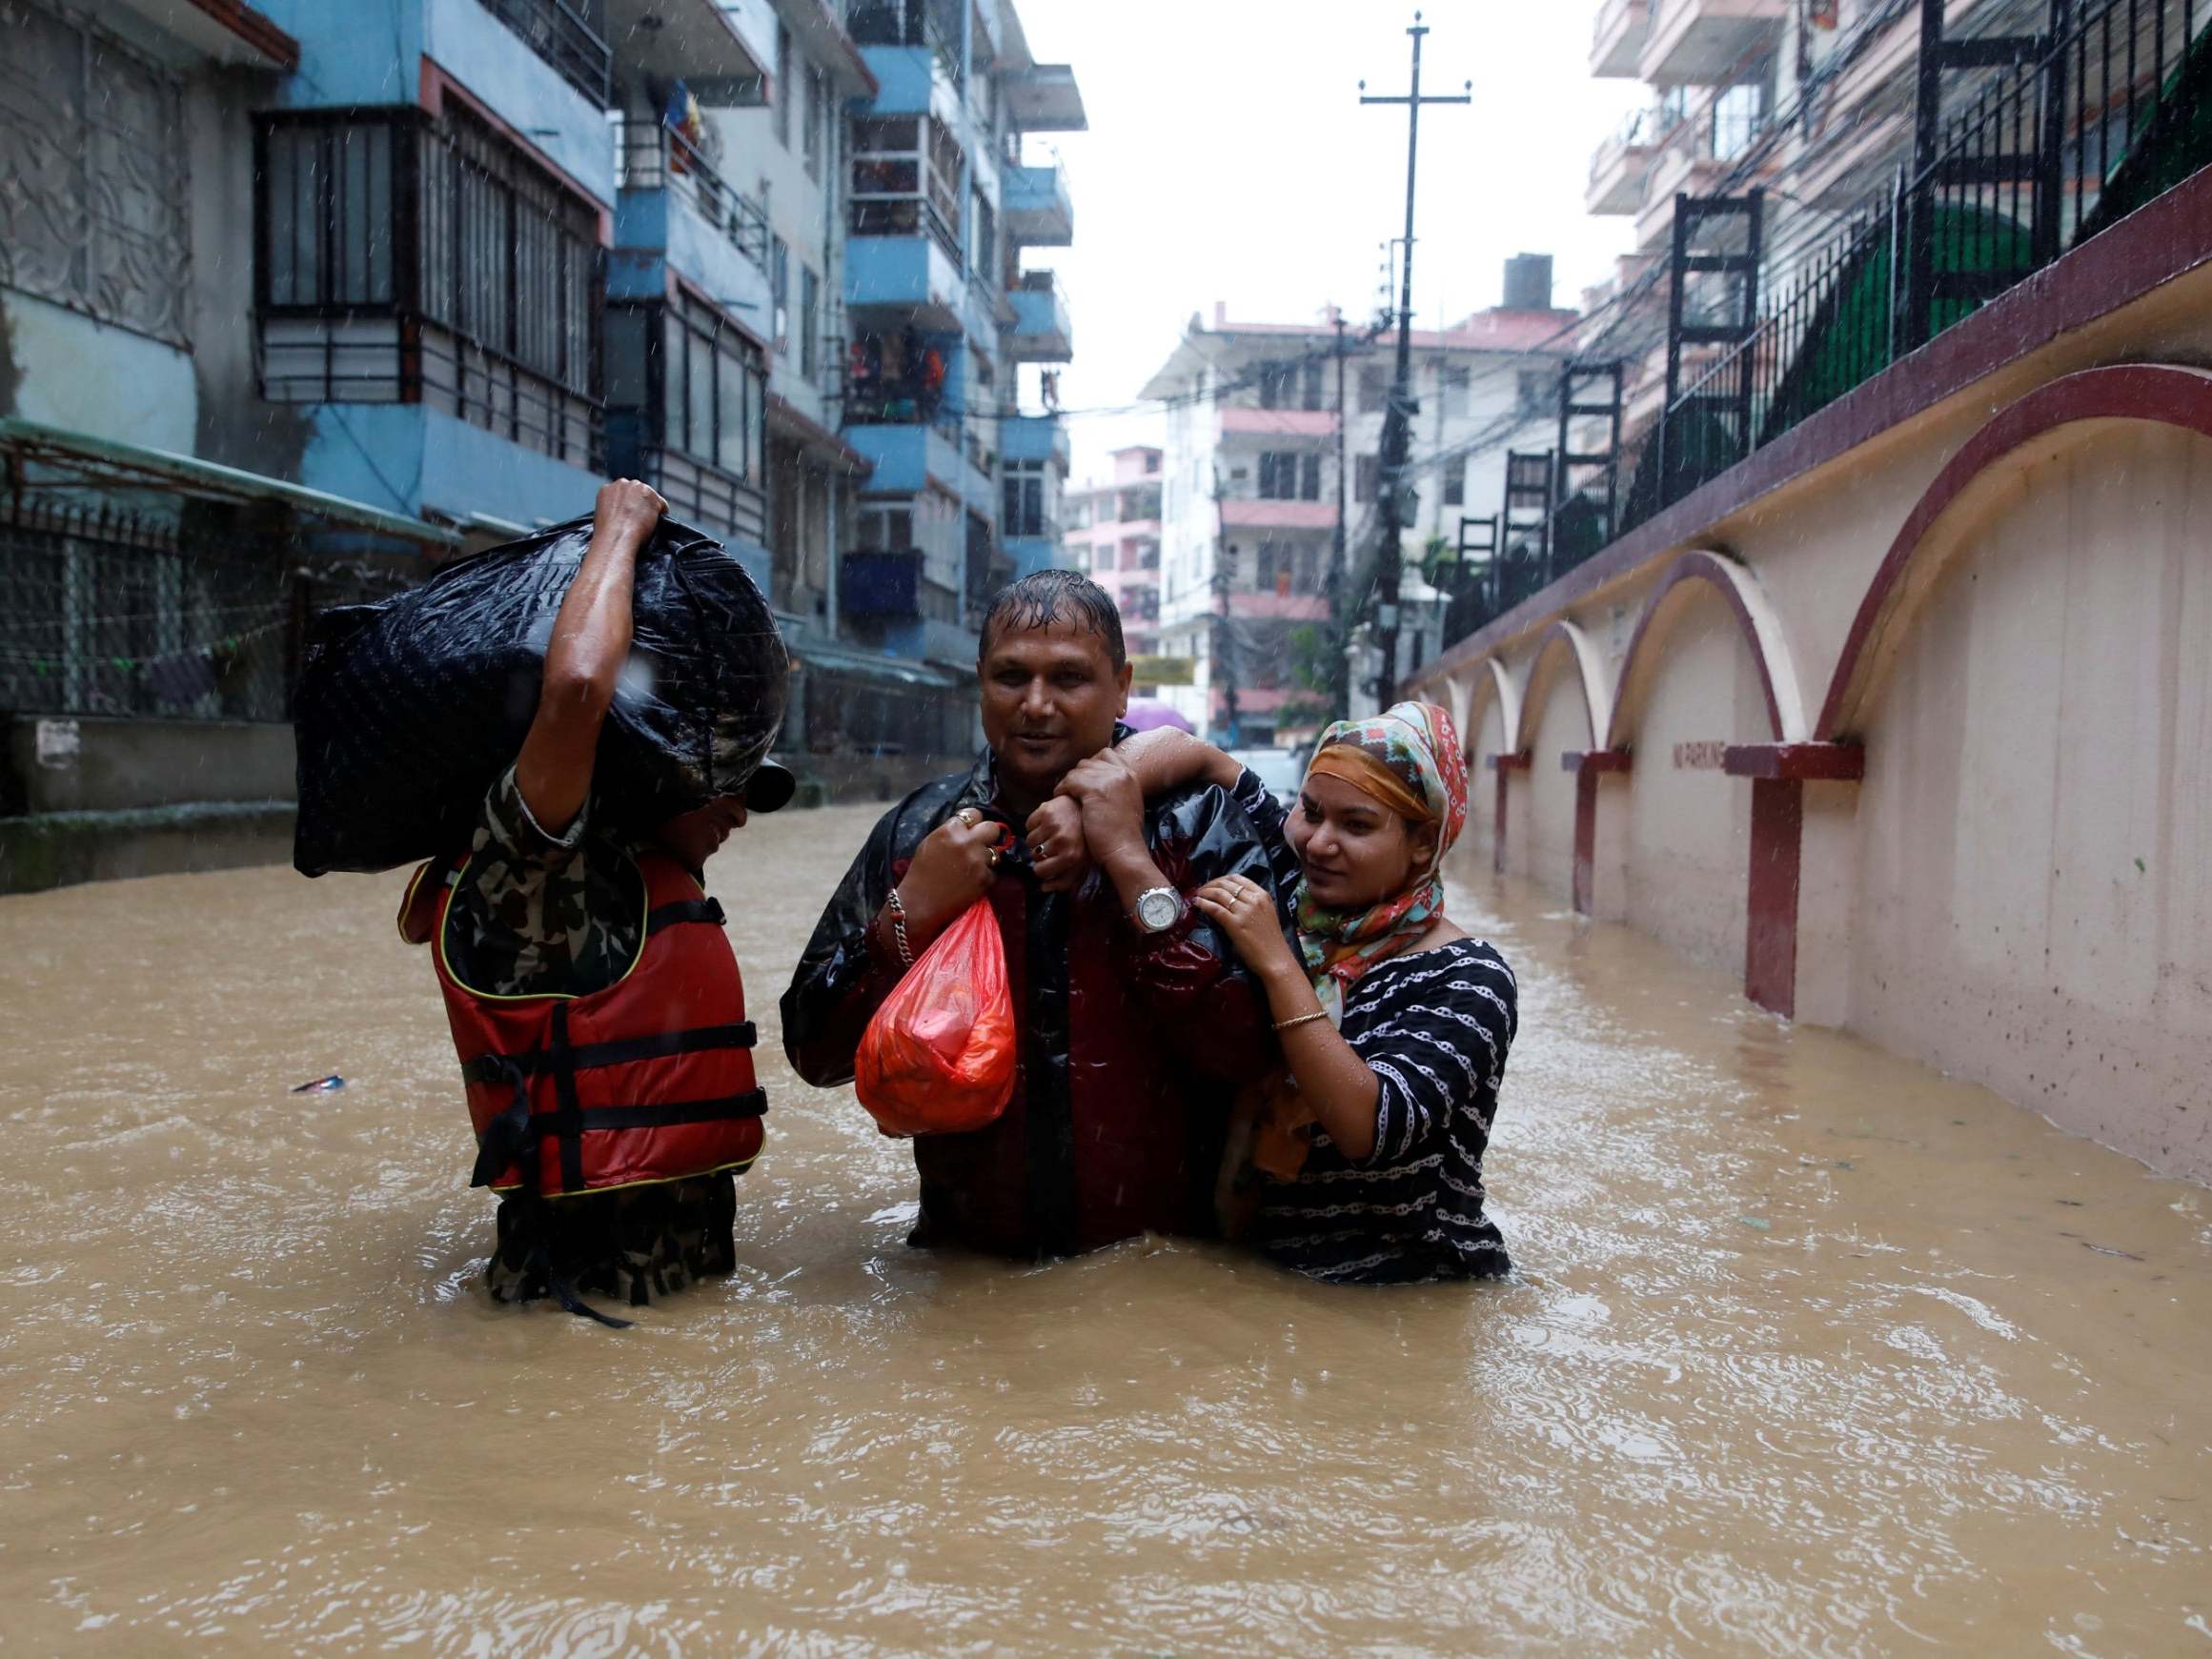 Nepal Flash Flooding Death Toll Rises To 47 As Dozens Remain Missing The Independent The